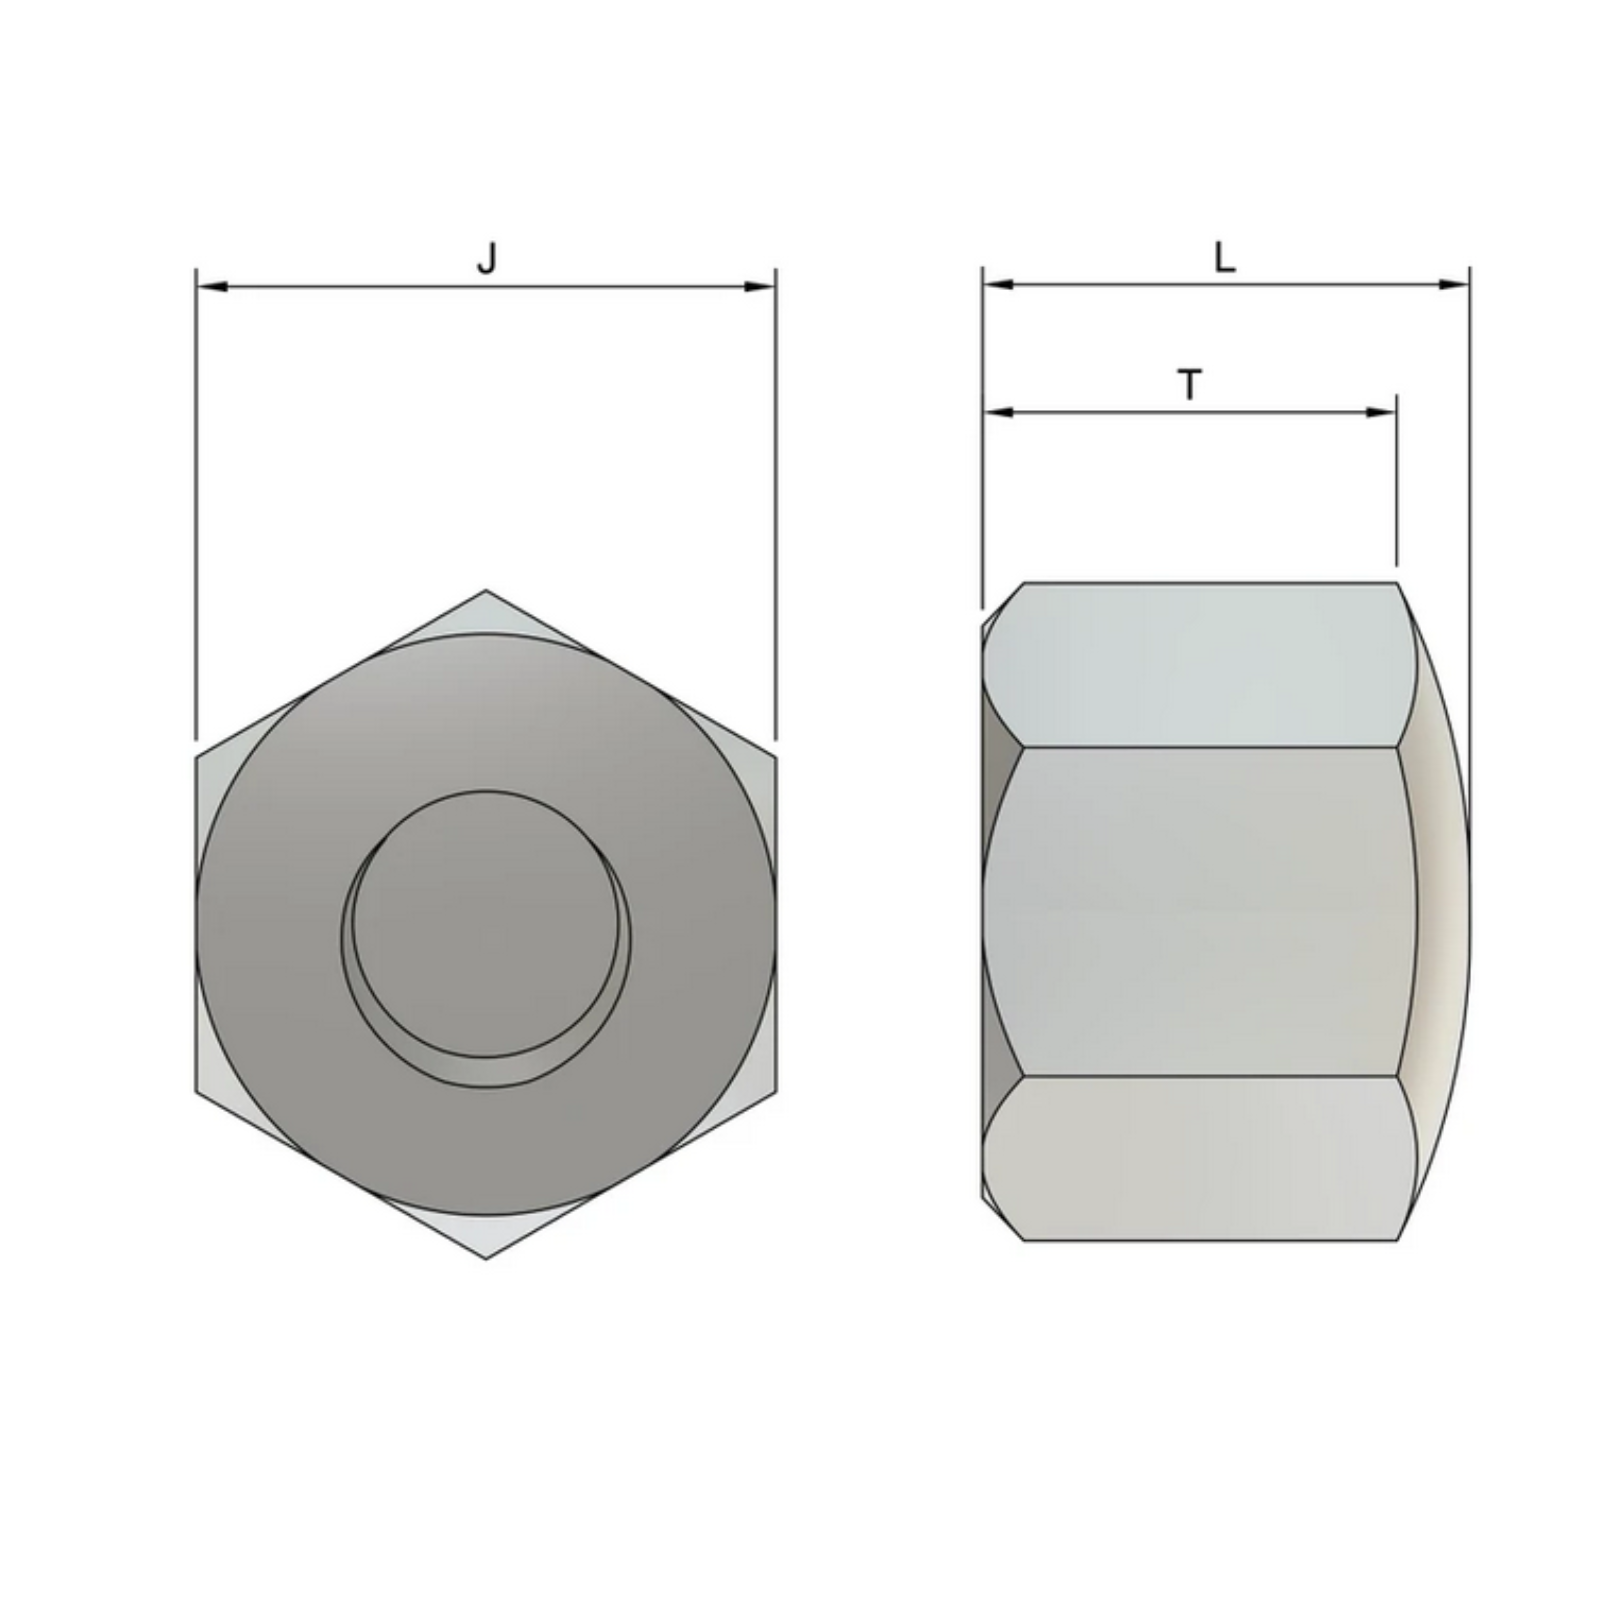 M6 Cap Nuts (DIN 917) - Stainless Steel (A2)